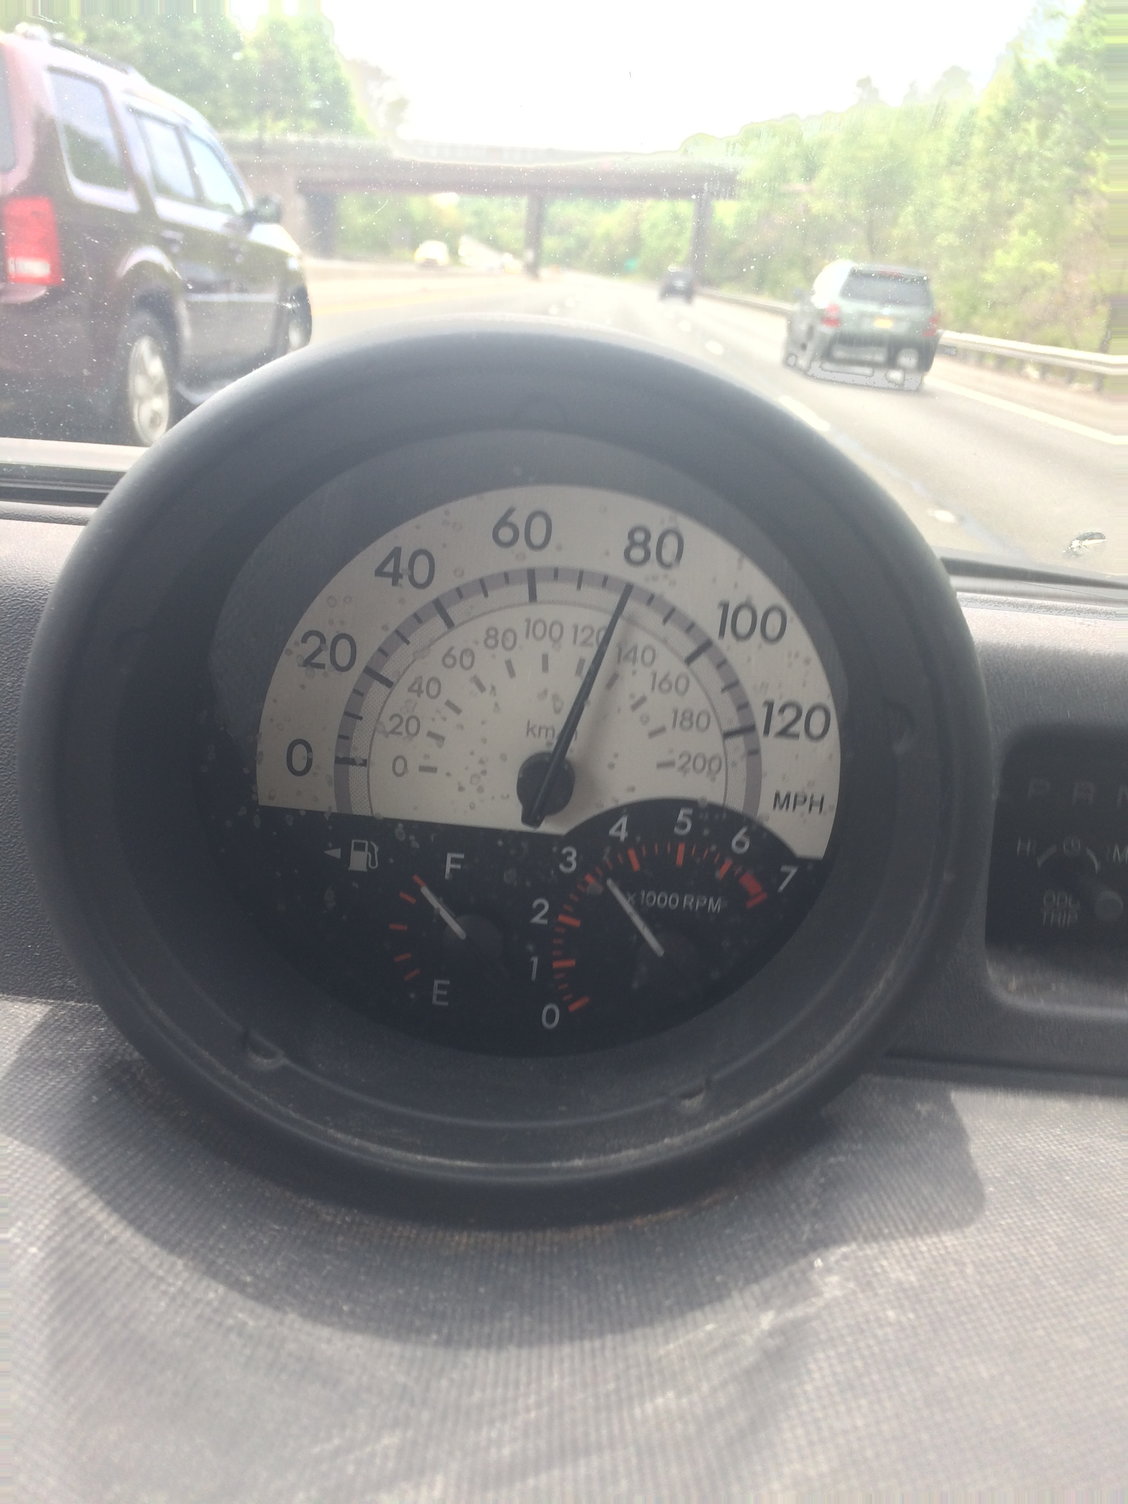 Once and for all, 80 MPH at 4000 RPM is this Normal? - Scionlife.com Is 4000 Rpm At 70 Mph Bad